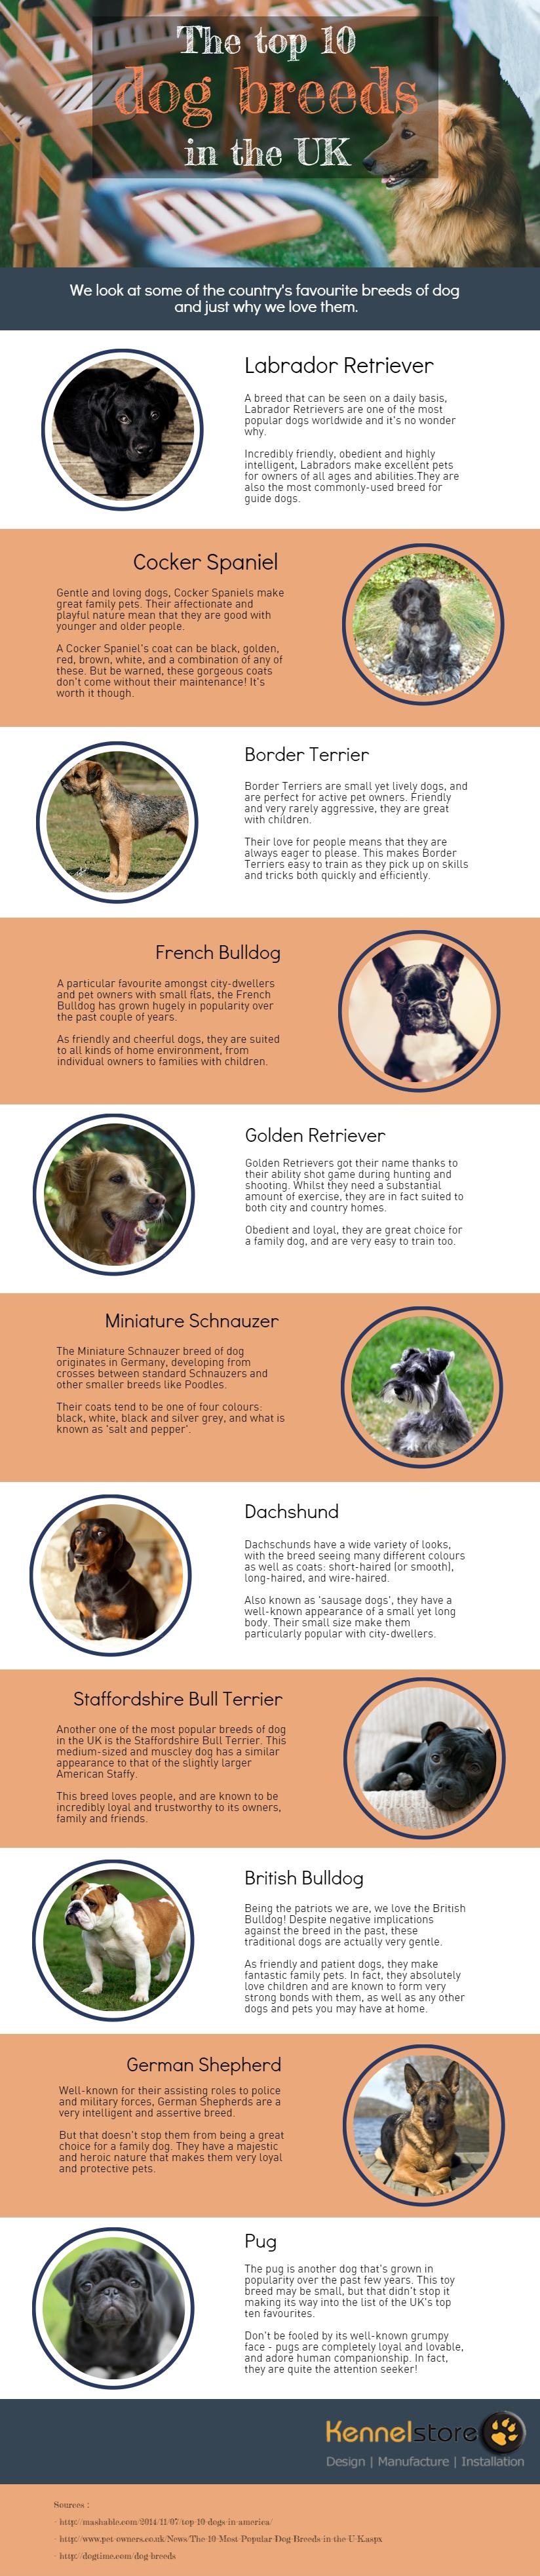 Top 10 Dog Breeds in the UK